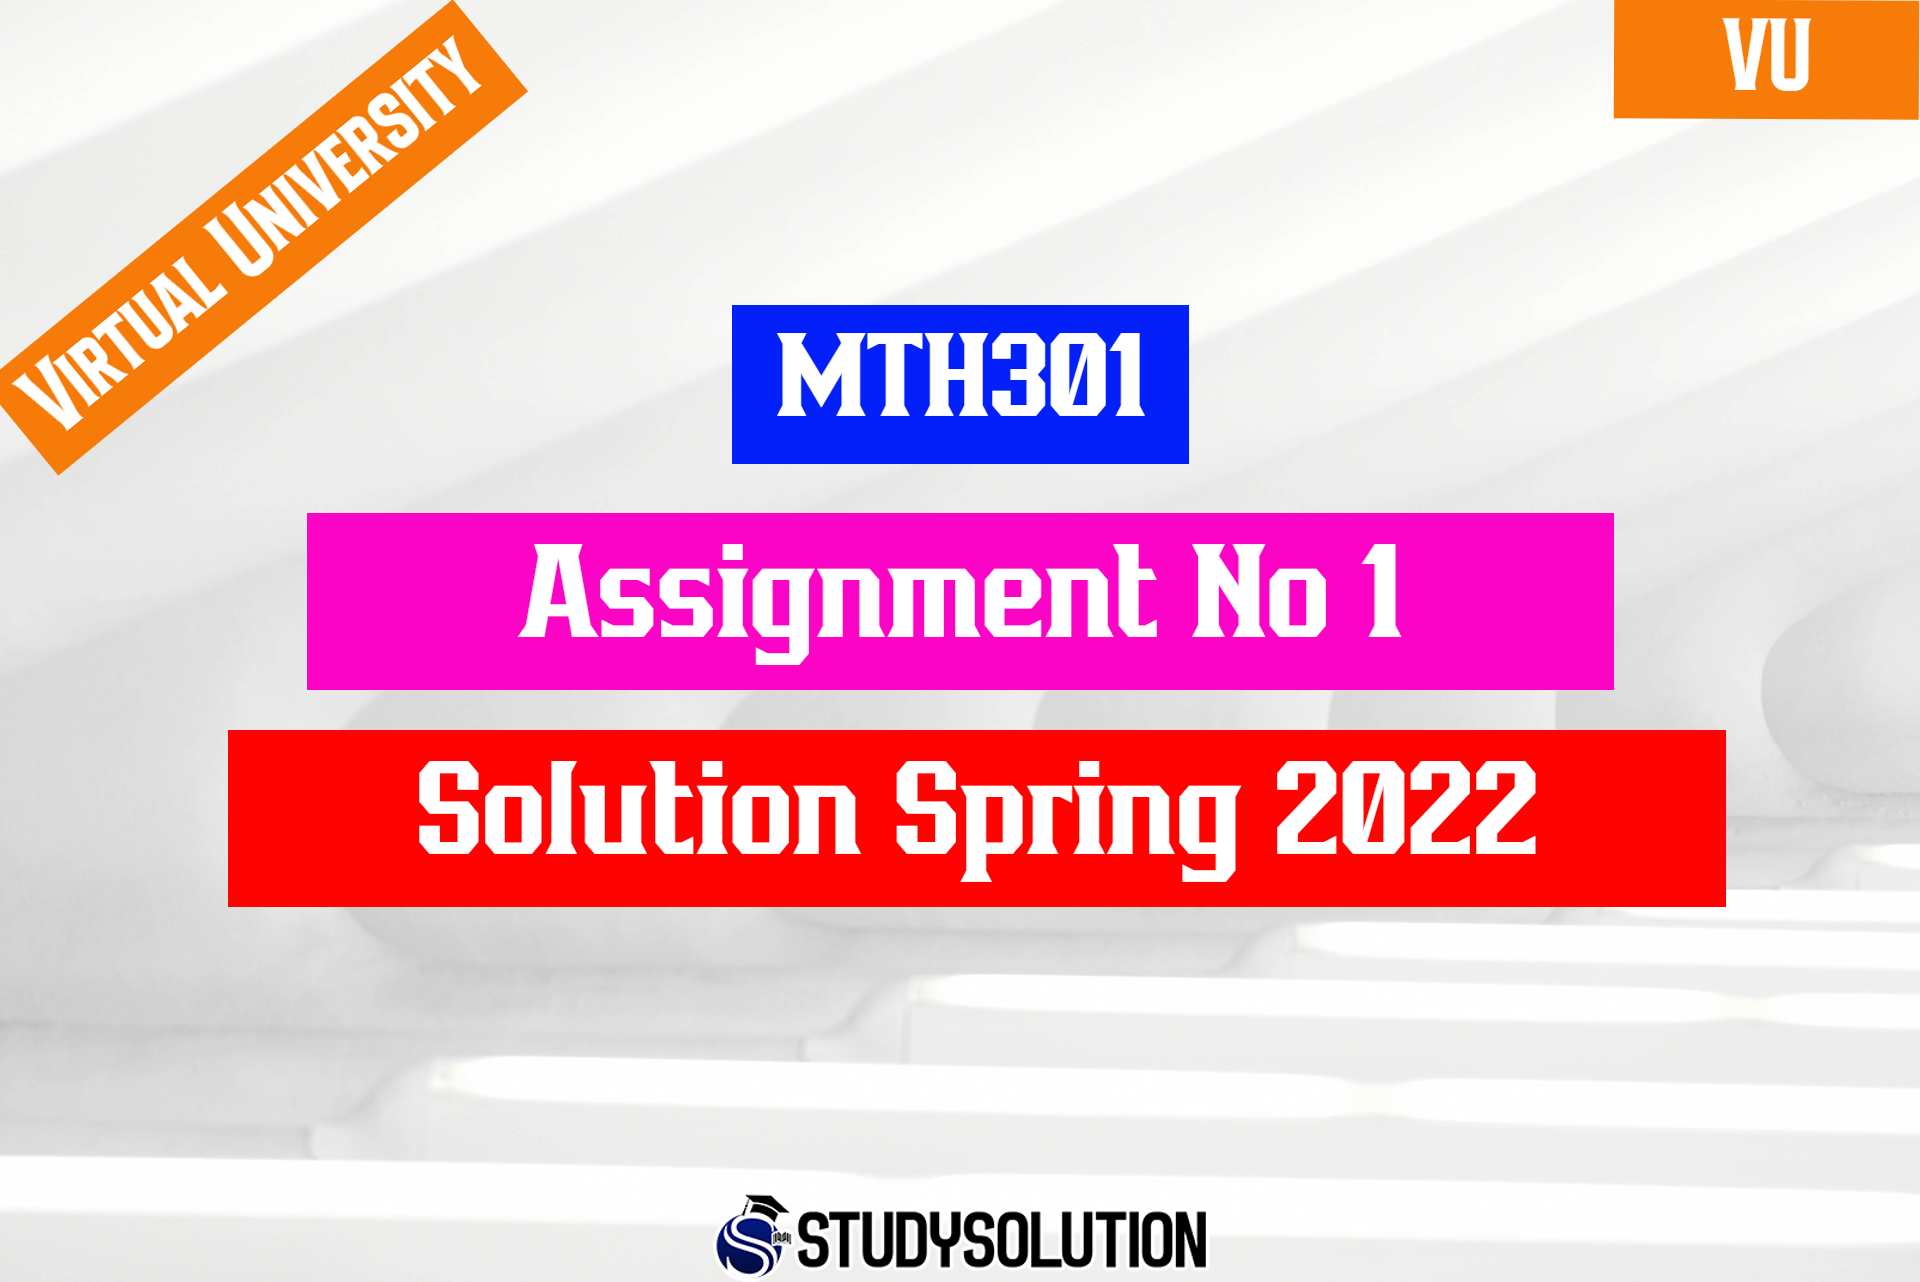 MTH301 Assignment No 1 Solution Spring 2022